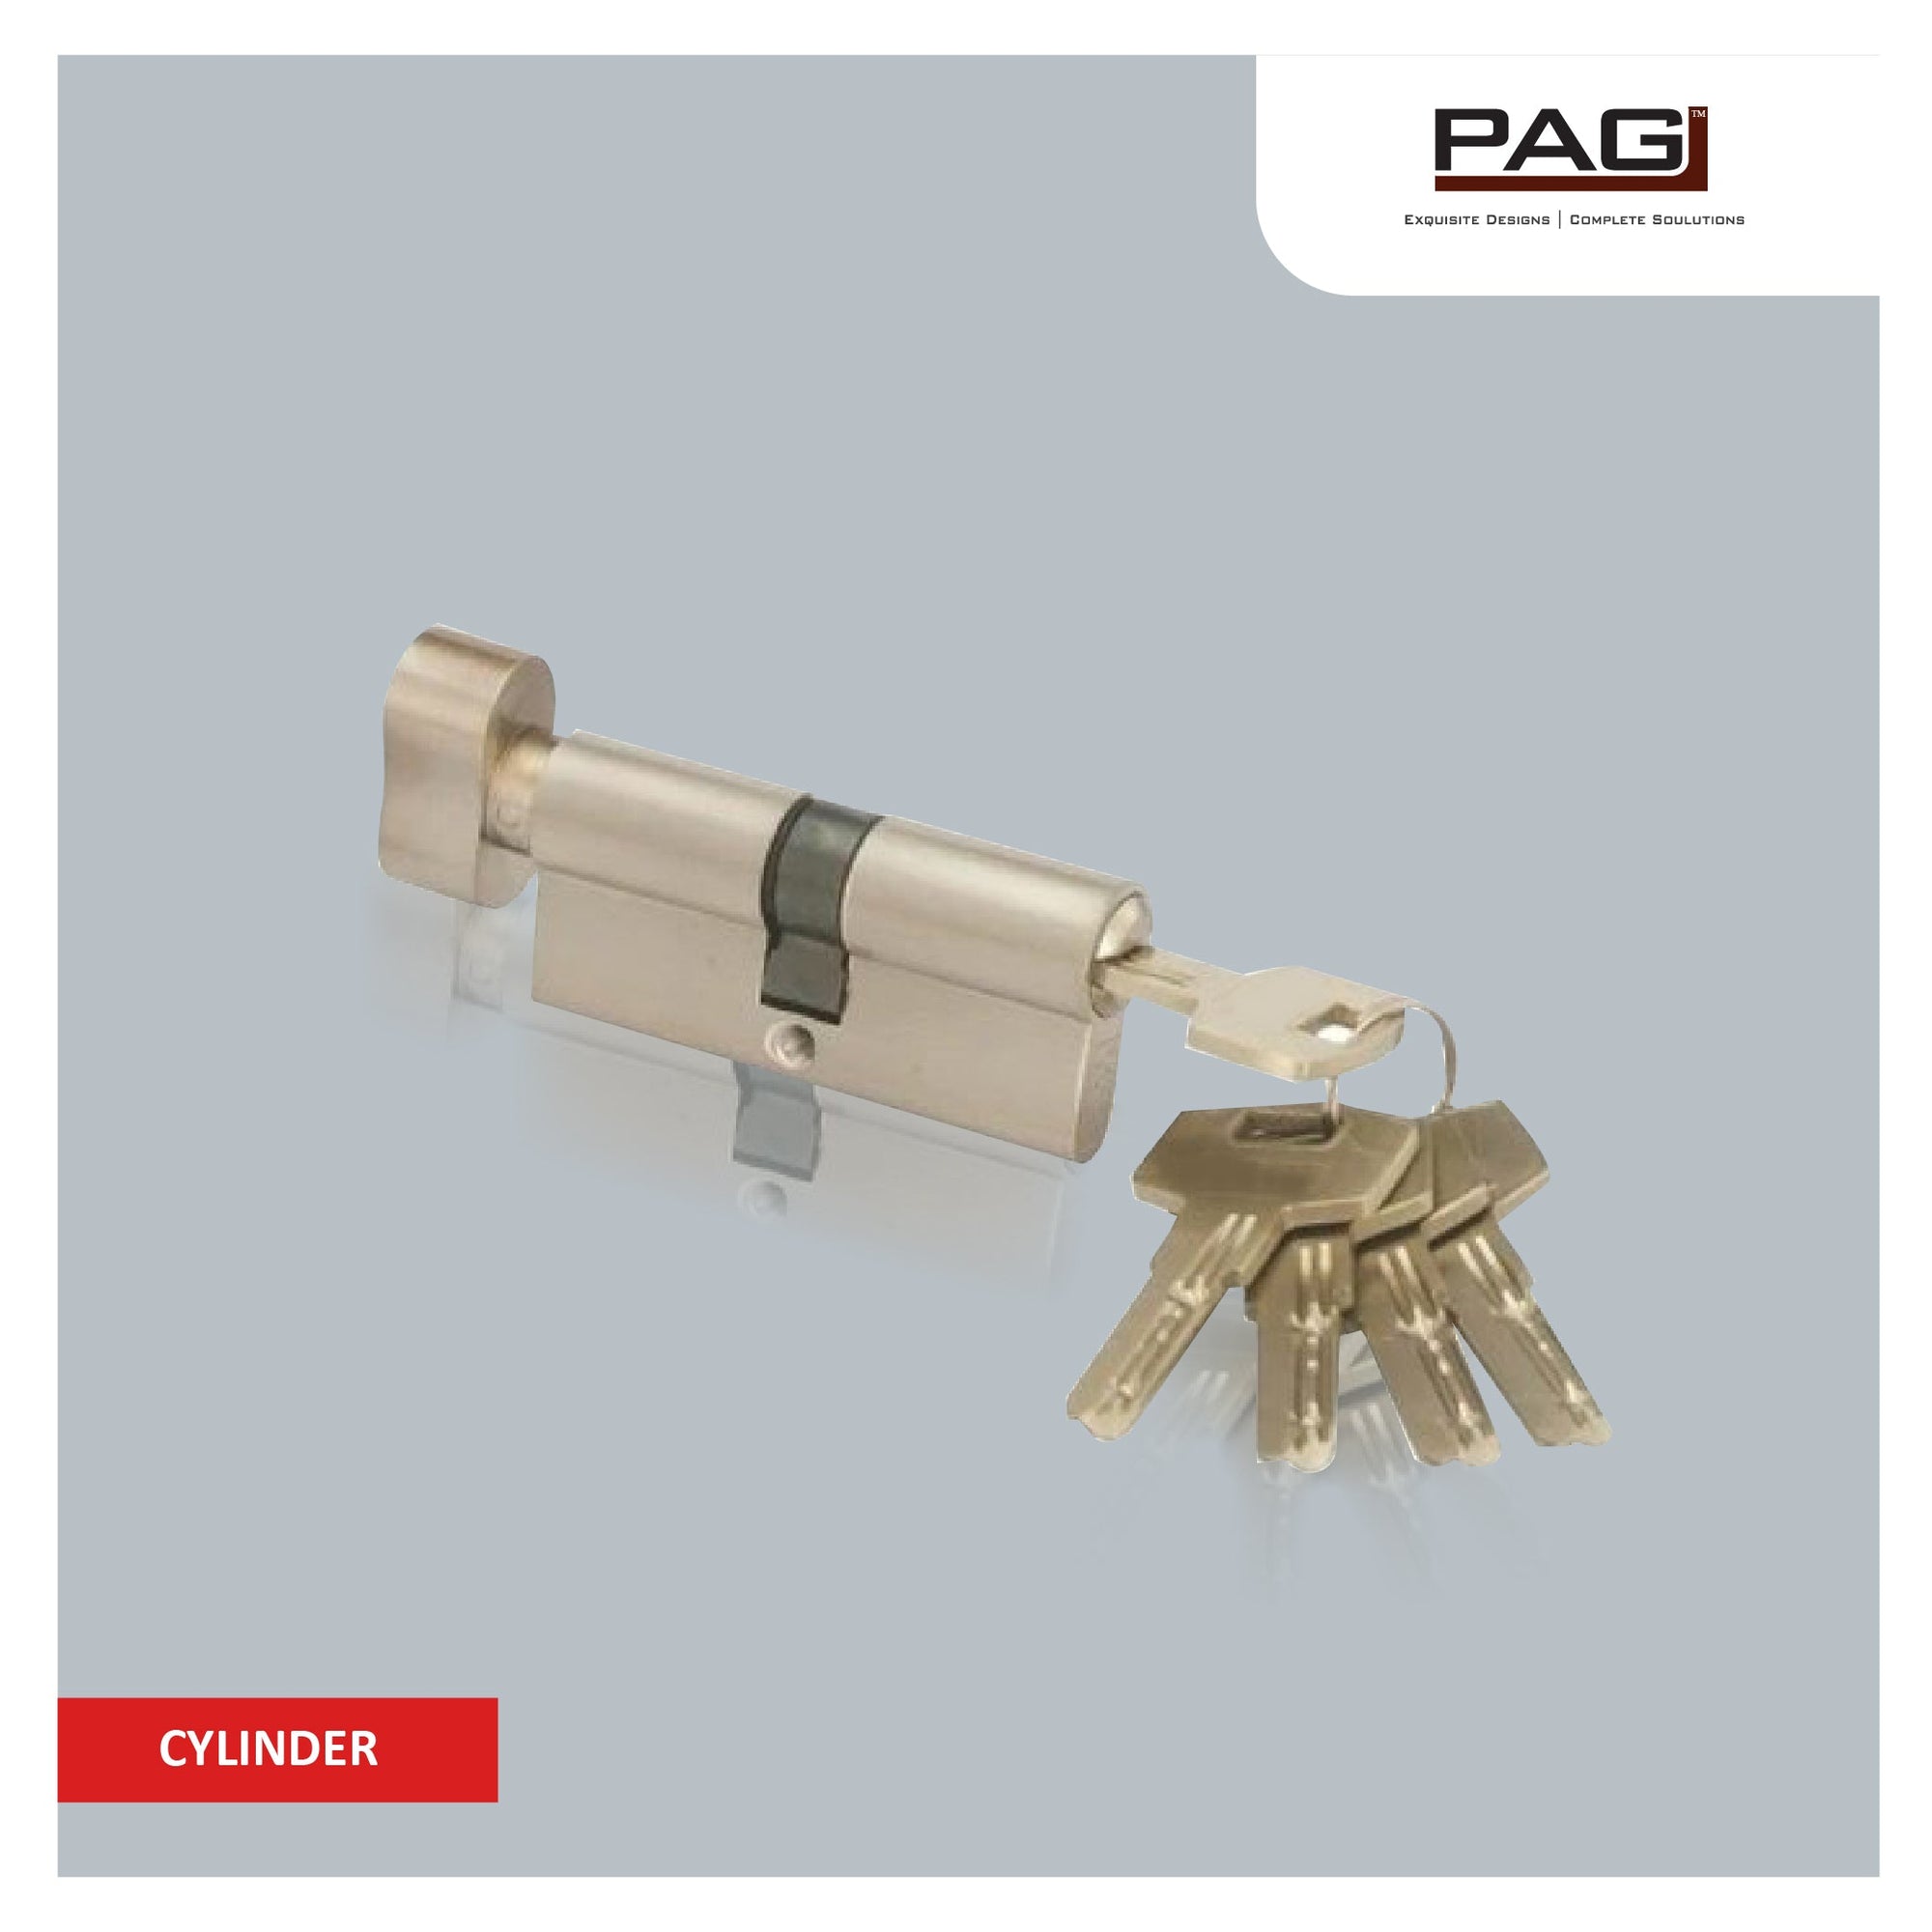 PAG Cylinder Locks - High-quality security cylinders for enhanced protection. Shop now at M. M. Noorbhoy & Co.